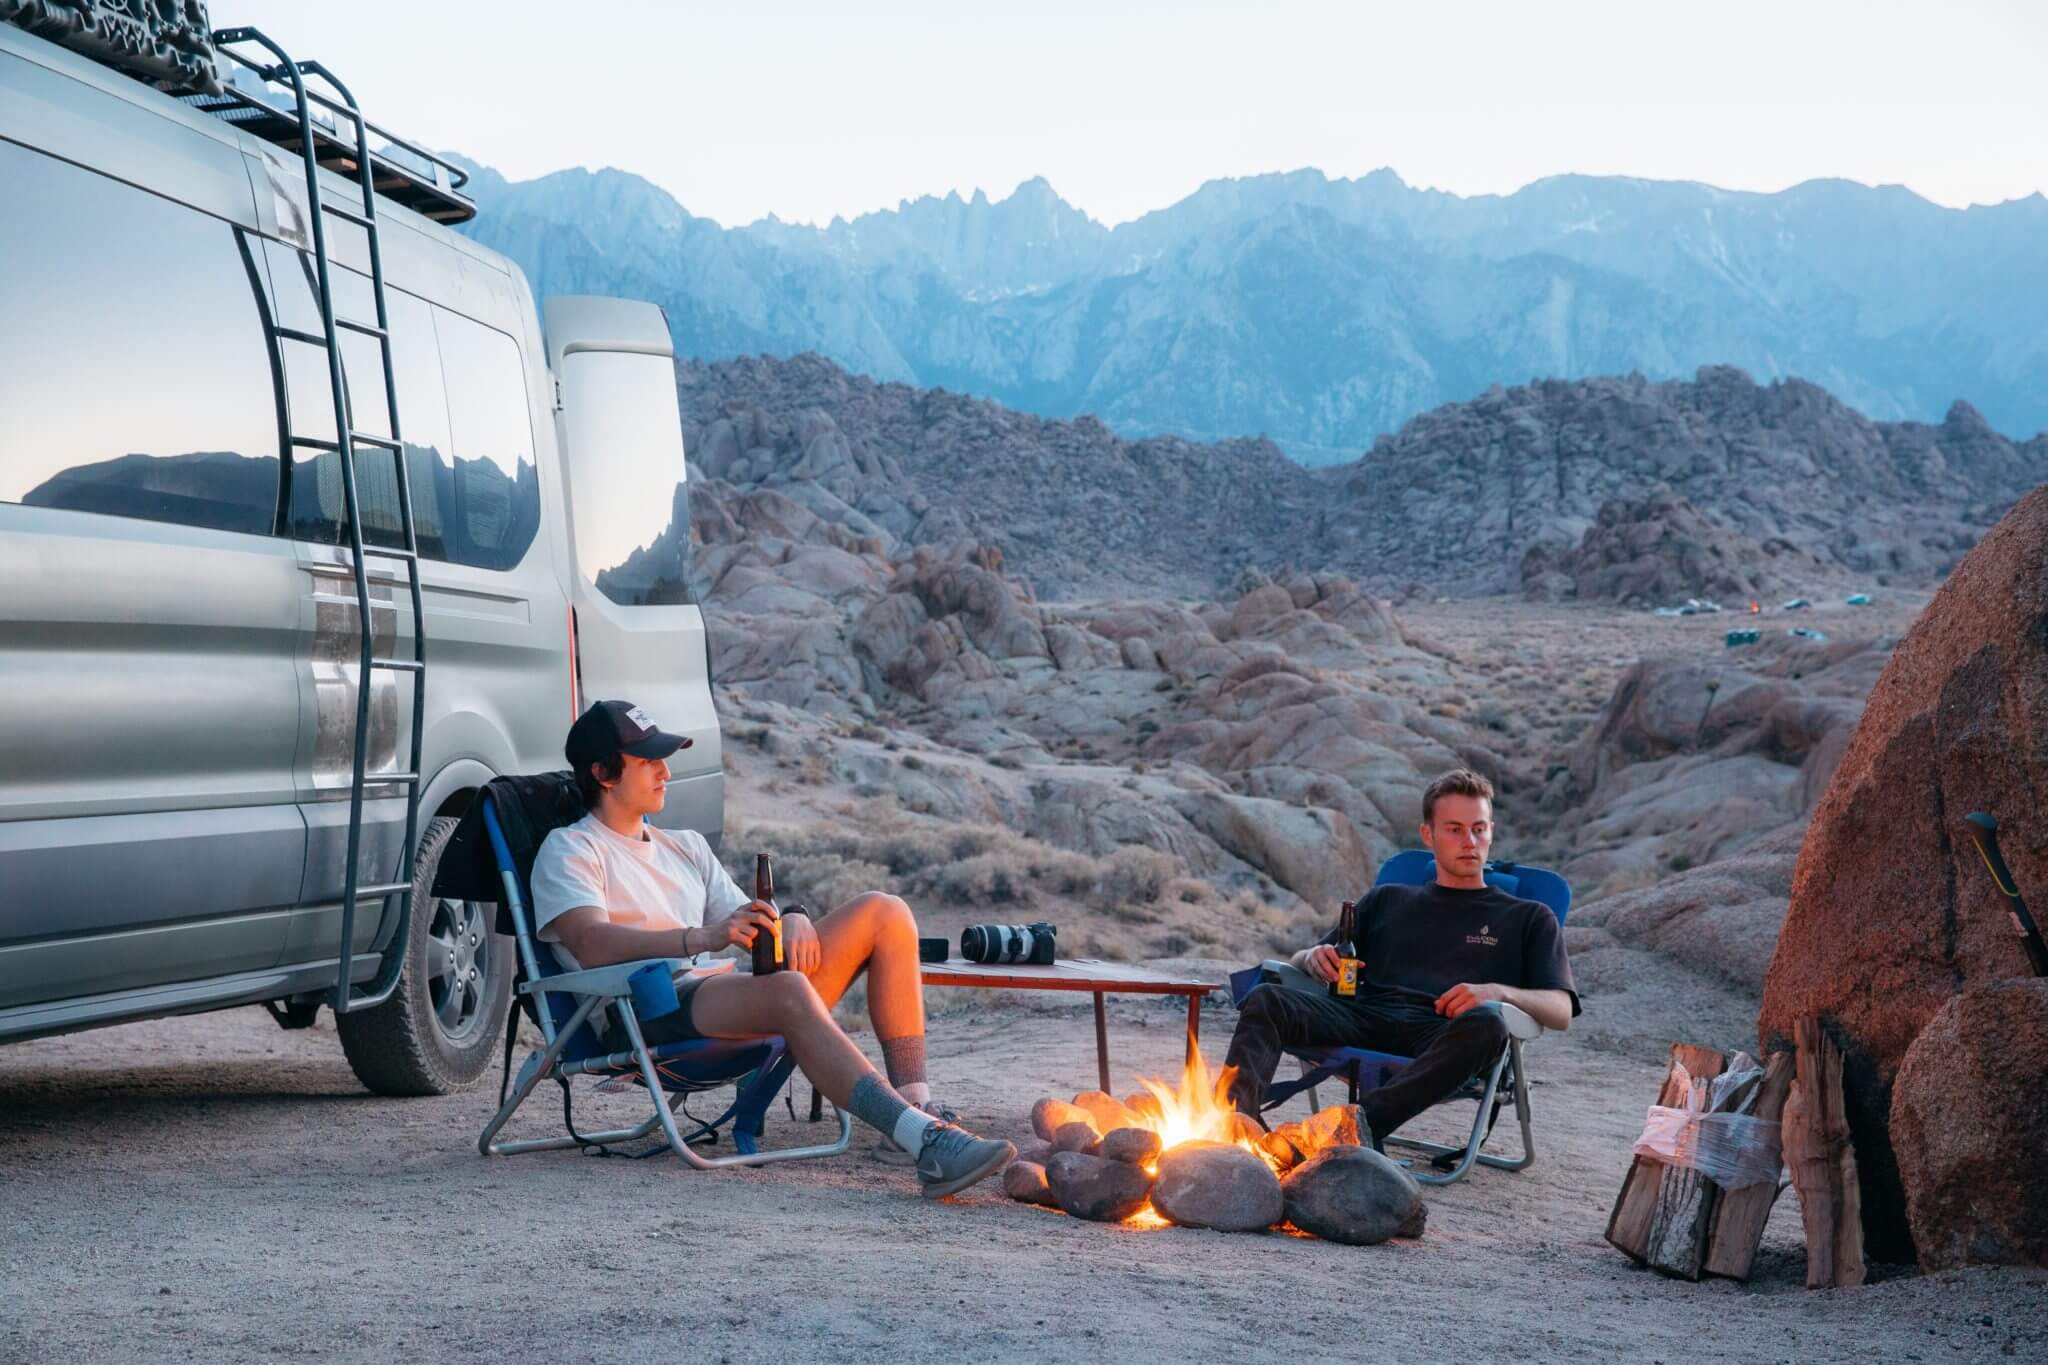 Relaxing by the campfire during a serene boondocking experience